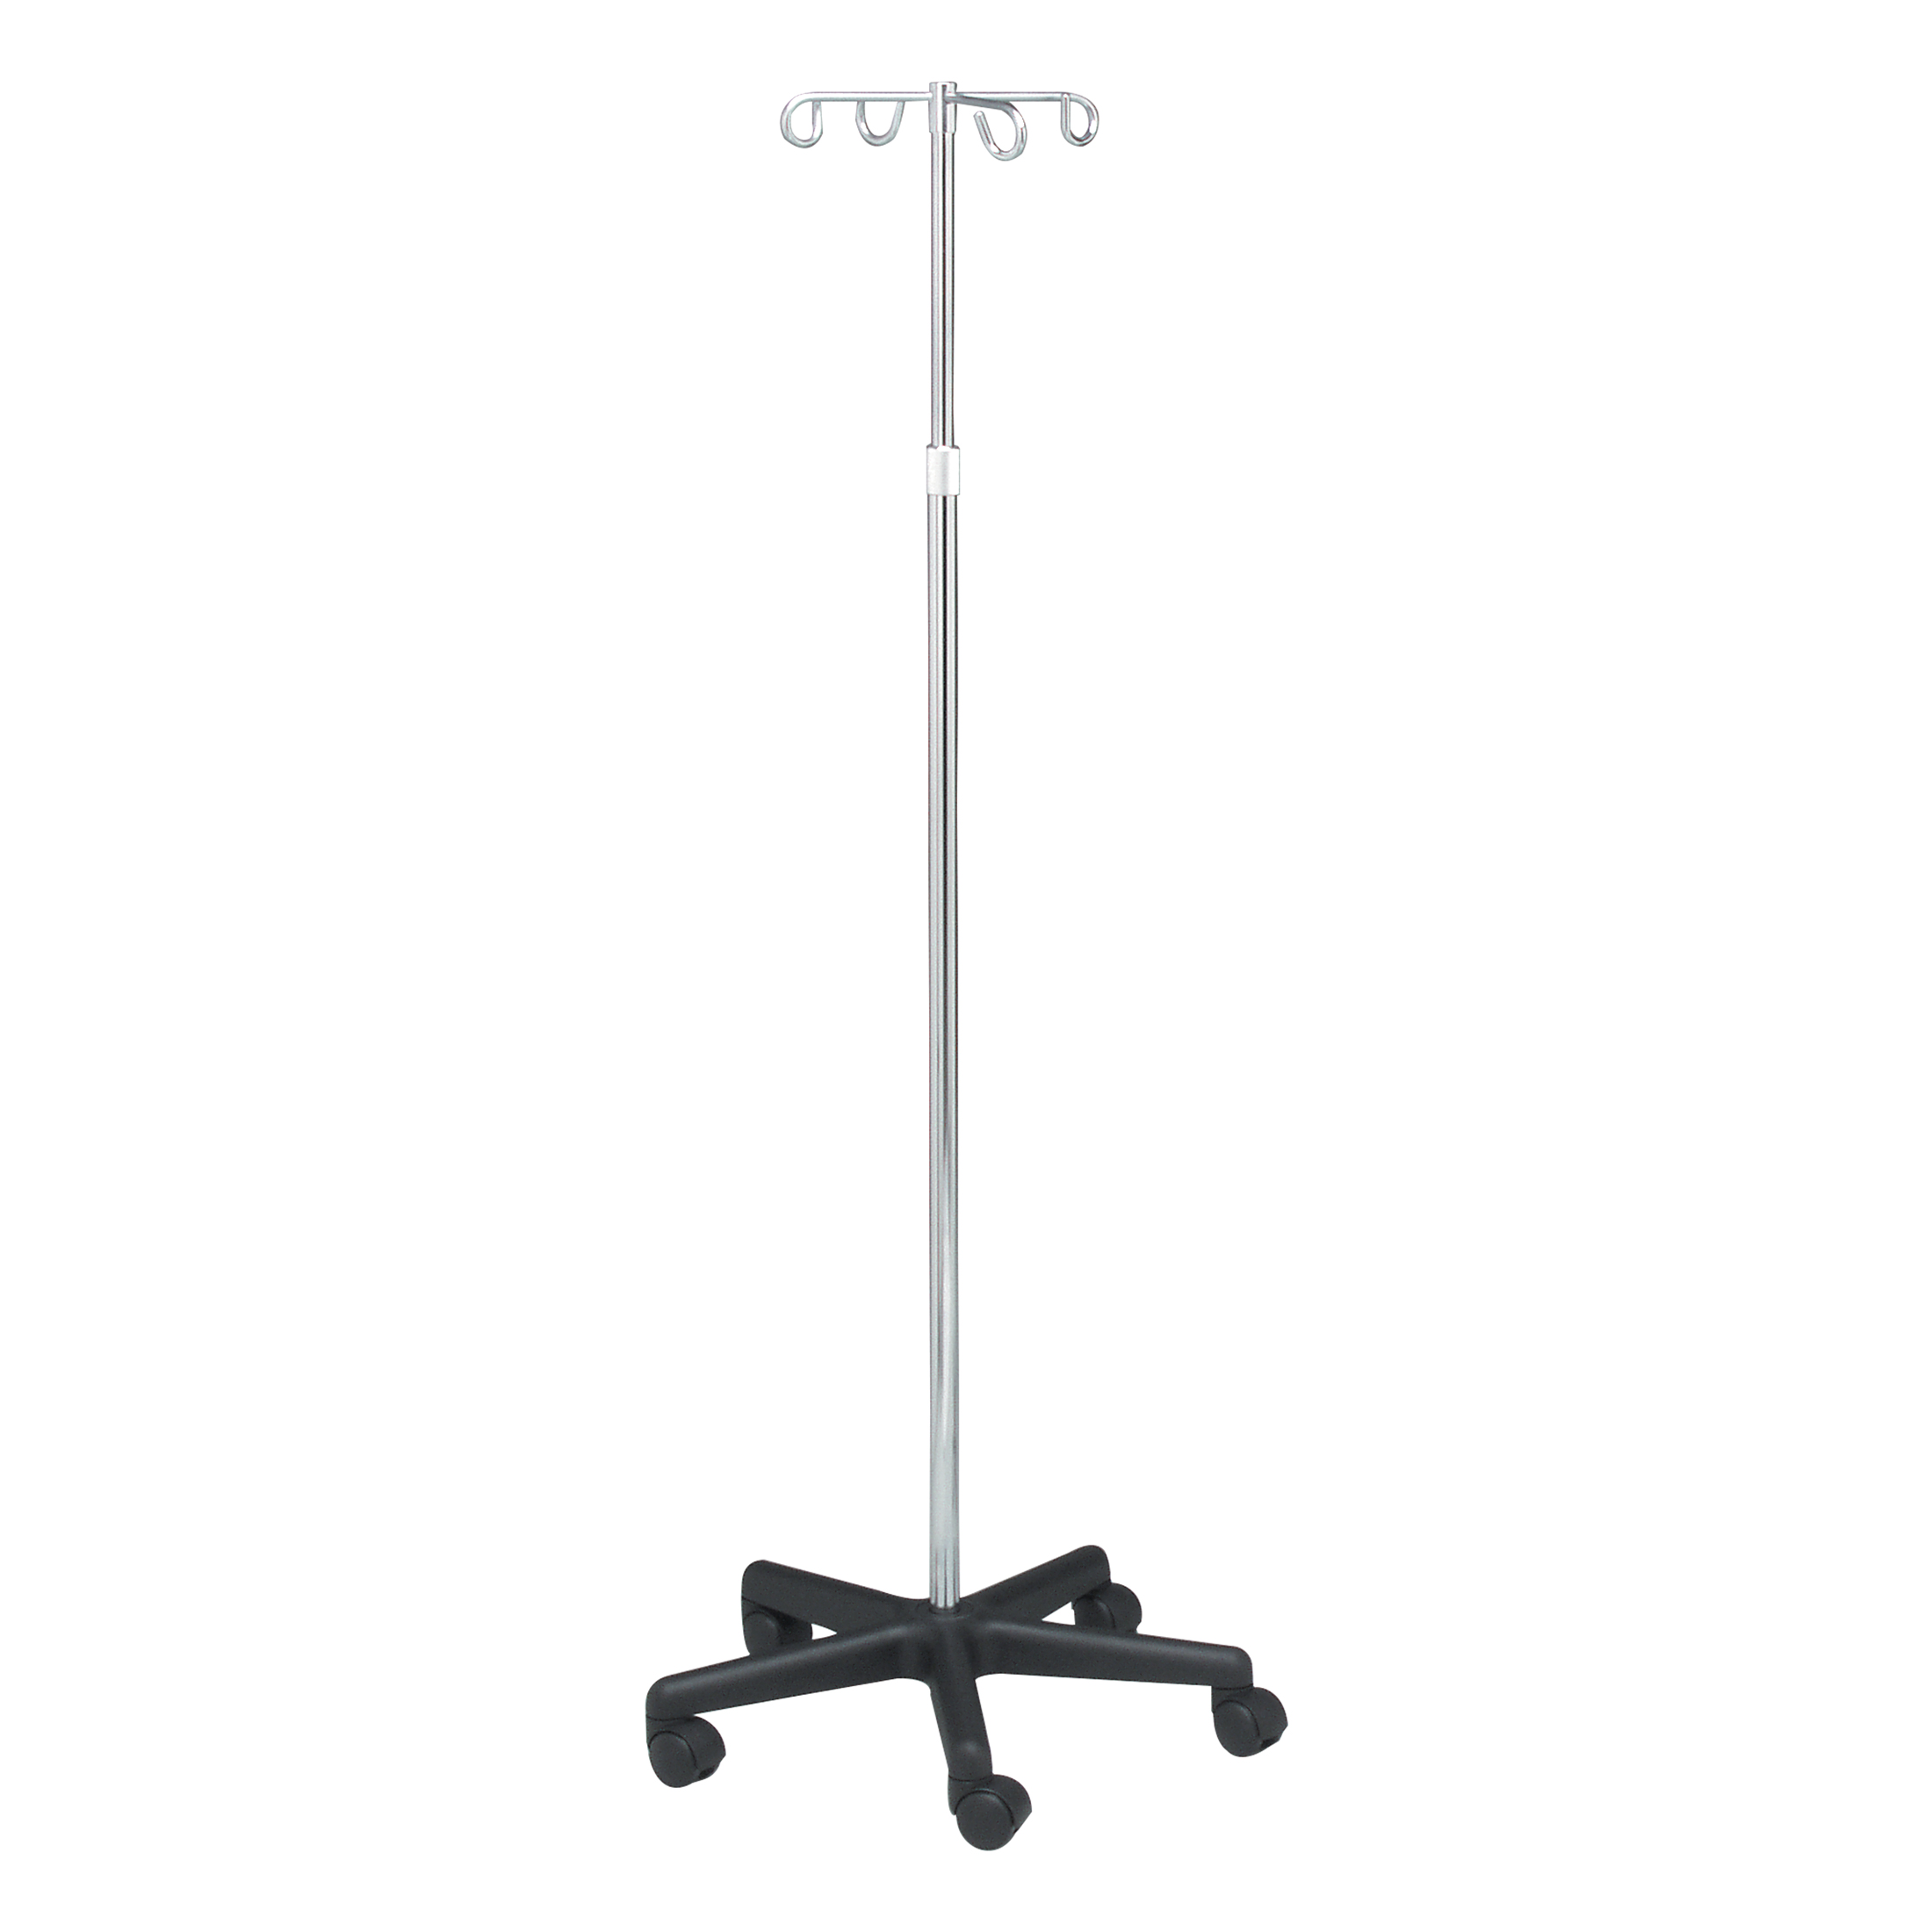 IV Stands & Poles Products, Supplies and Equipment